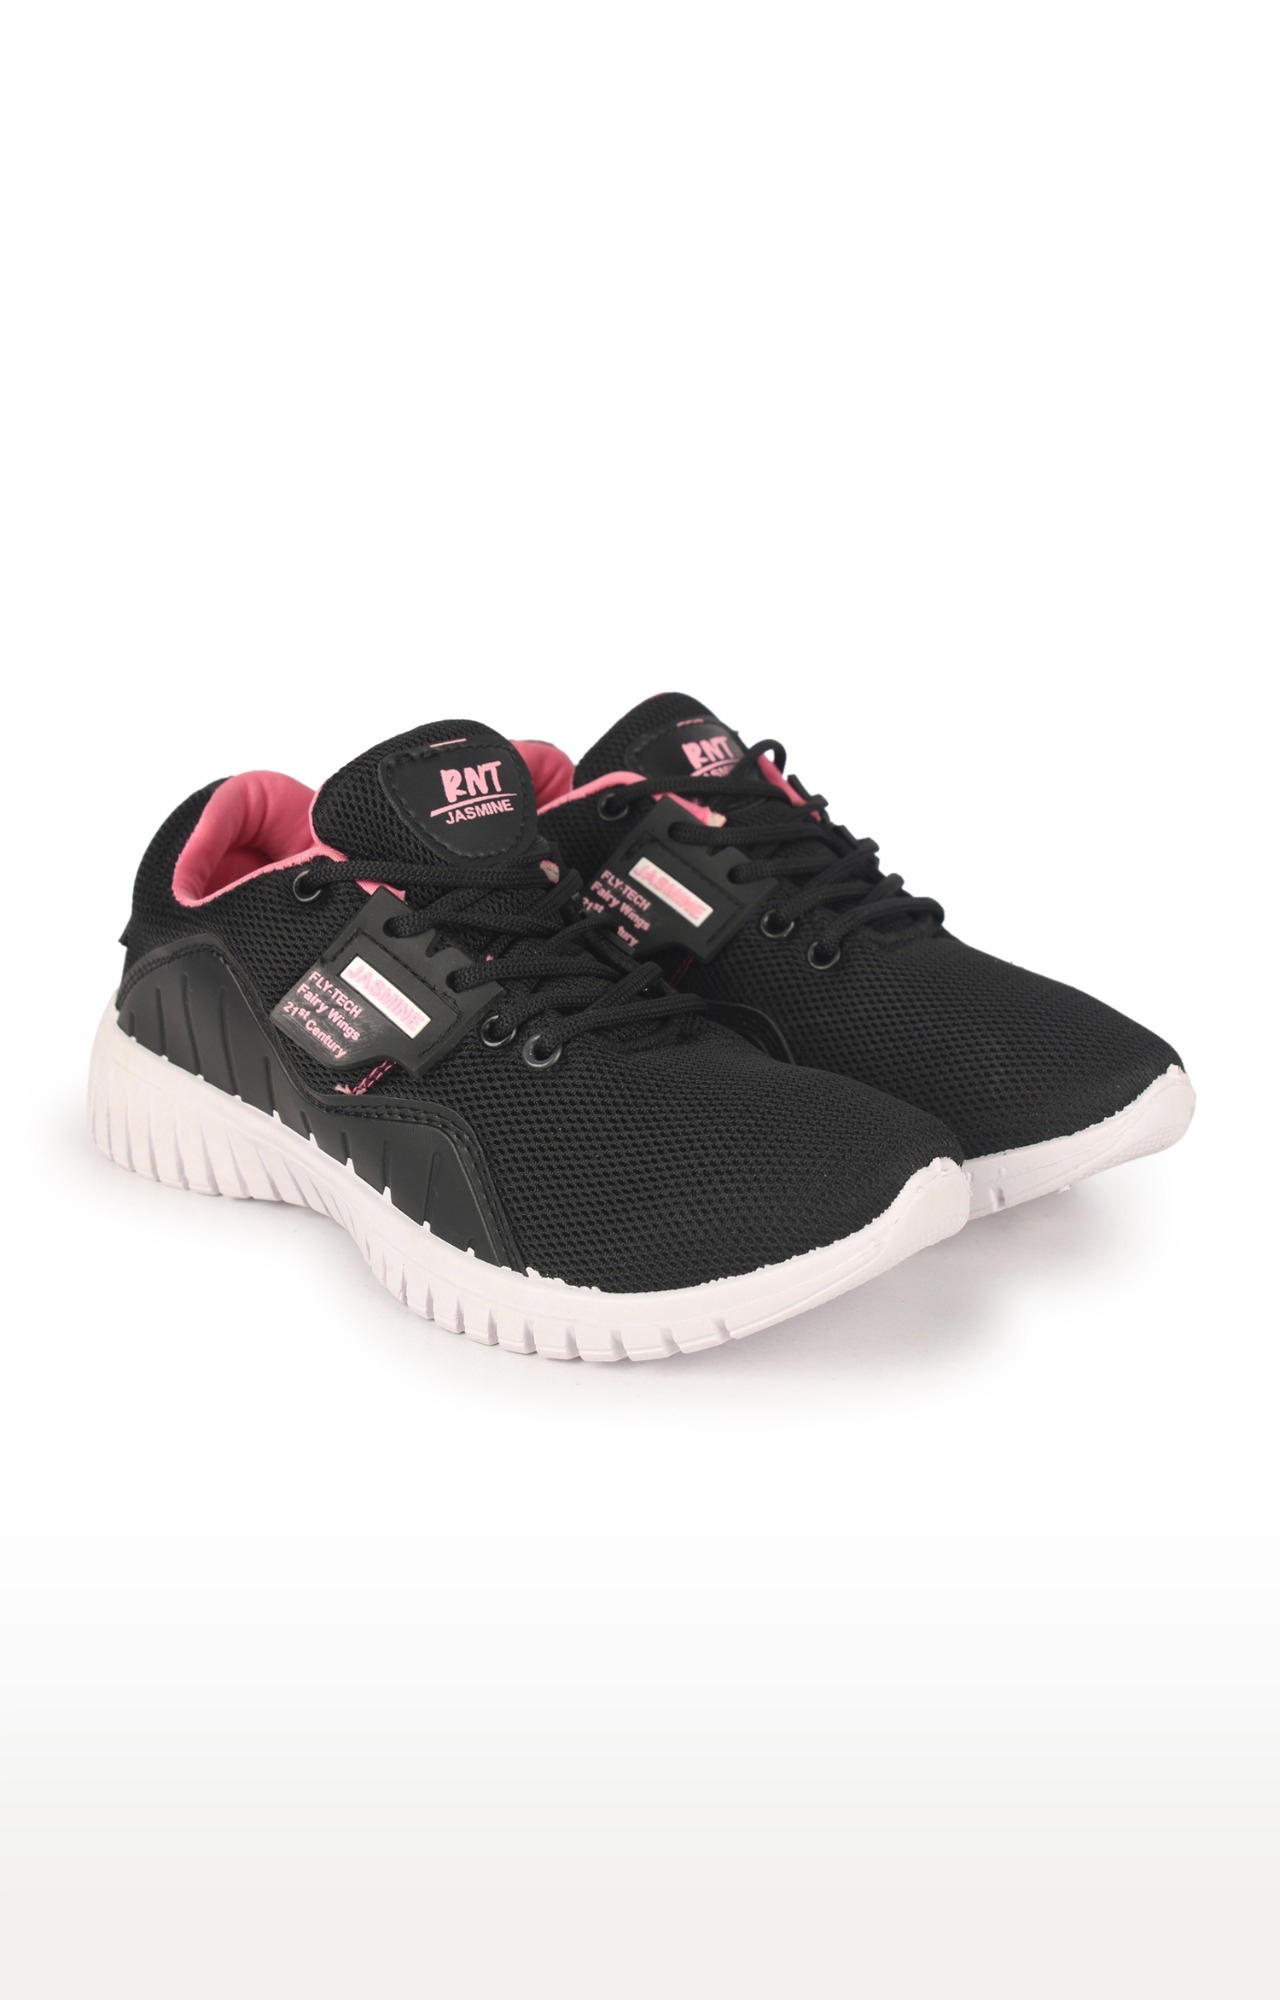 RNT | RNT Jasmine Black and Pink Shoes for Women 0